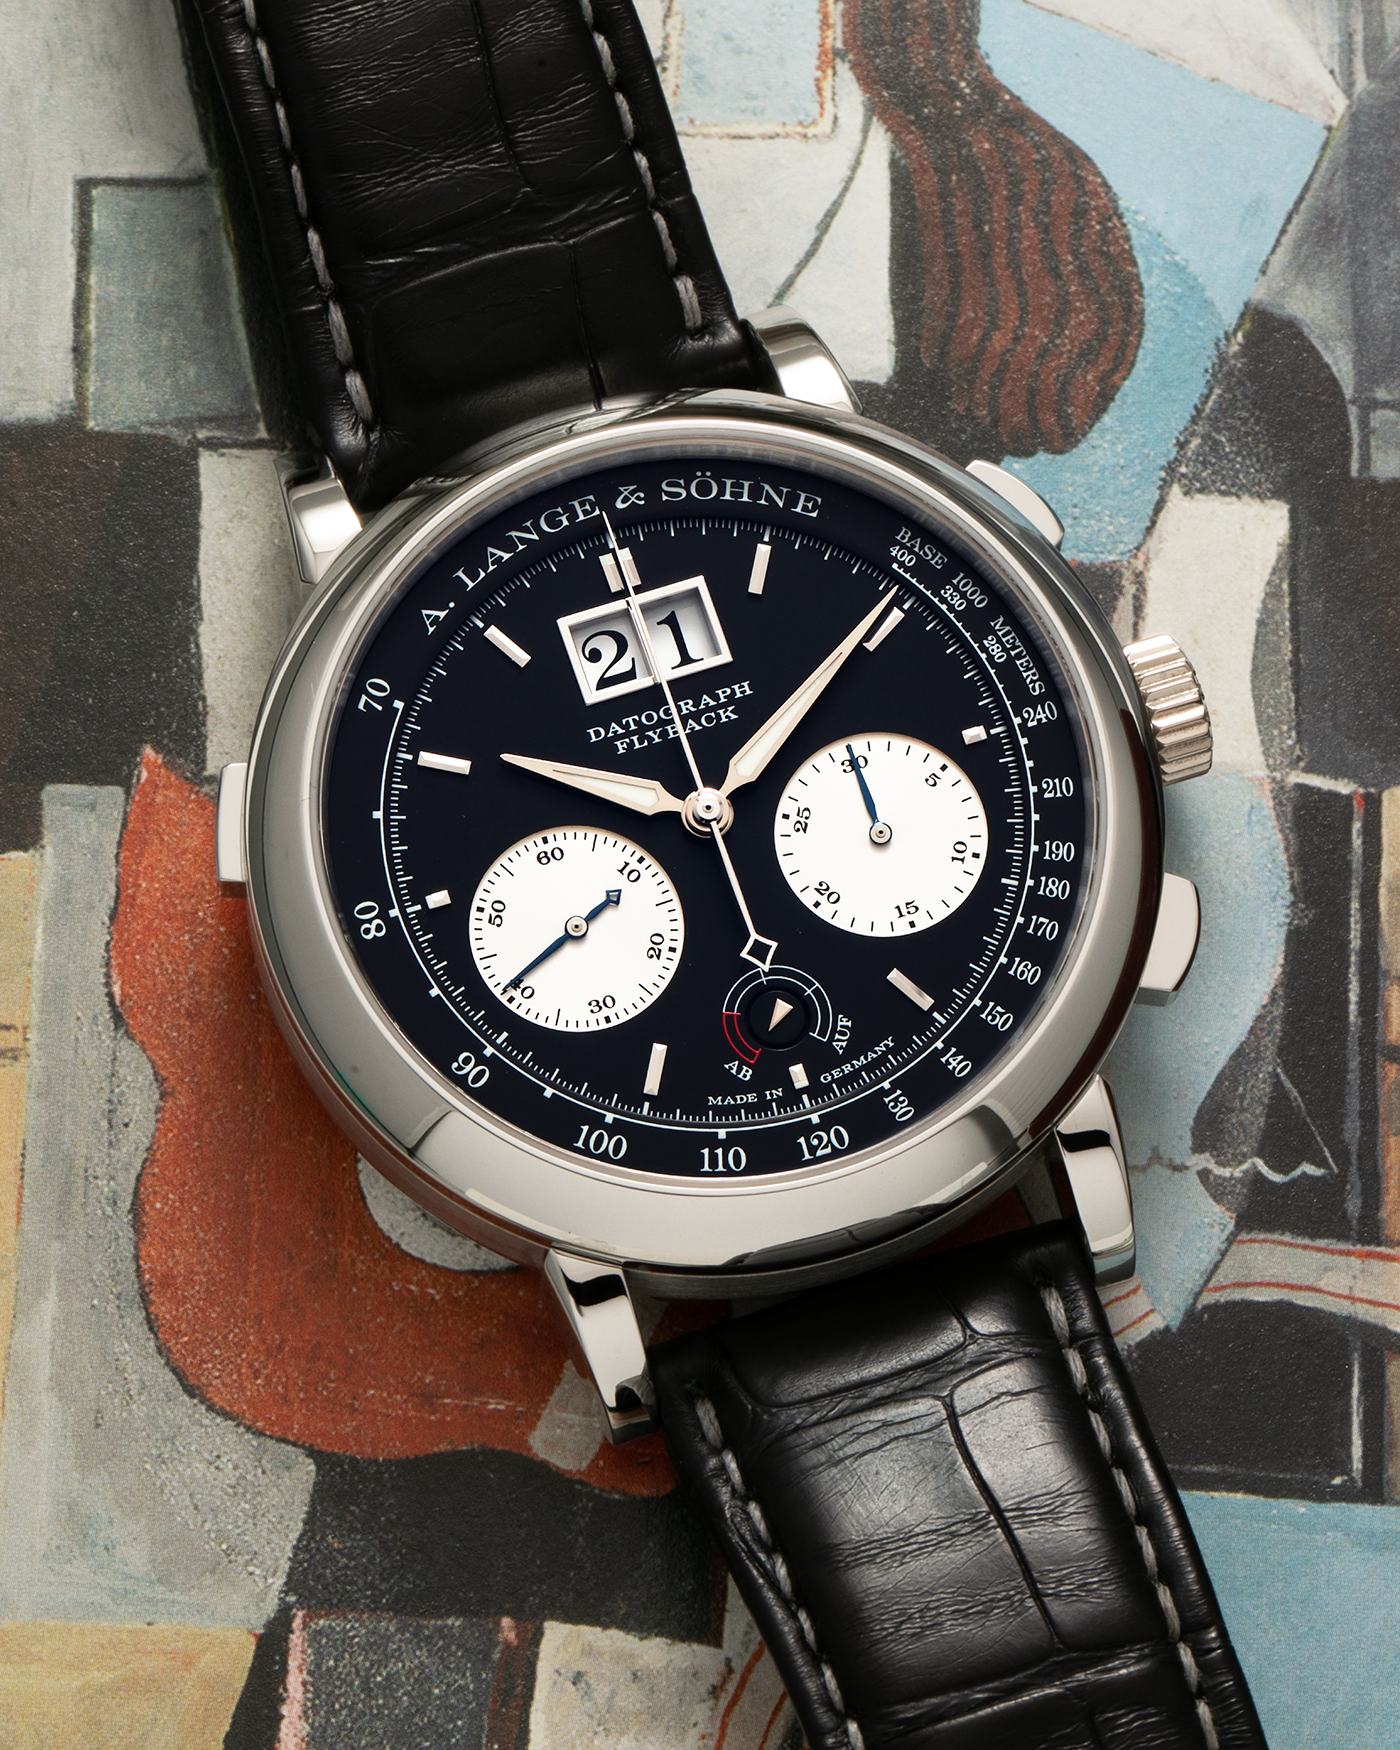 Brand: A. Lange & Söhne Year: 2020 Model: Datograph Up/Down Reference Number: 405.035 Material: Platinum 950 Movement: A. Lange & Söhne Cal. L951.6, Manual-Winding Case Dimensions: 41mm x 13.1mm Lug Width: 20mm Strap: A. Lange & Söhne Black Alligator Strap with Signed Platinum 950 Tang Buckle